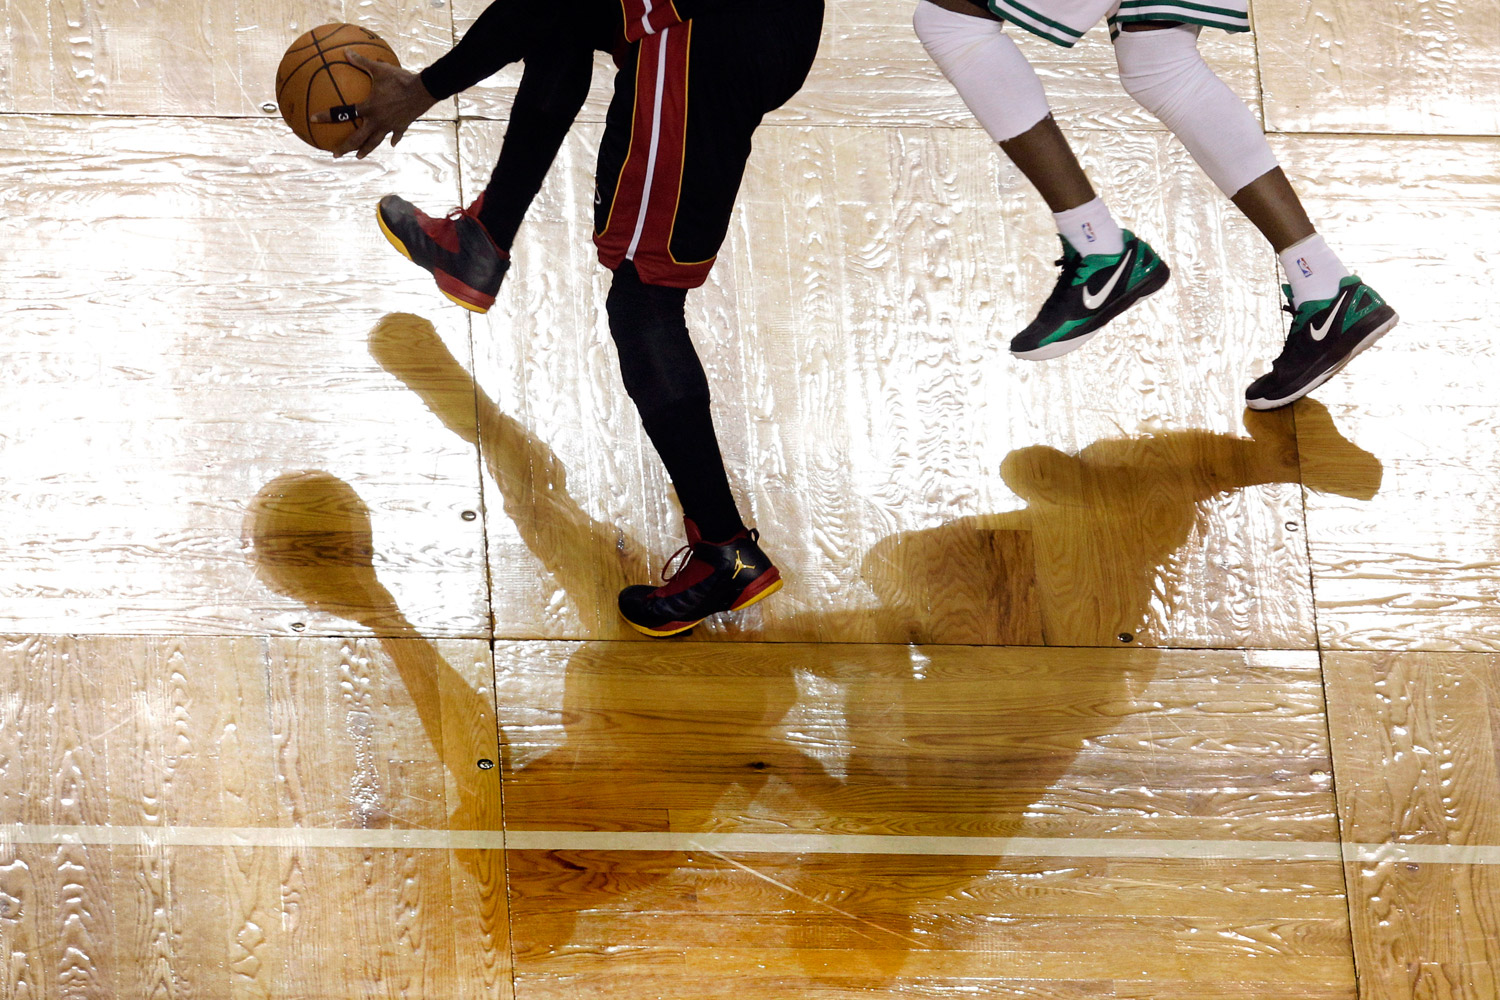 June 3, 2012. Miami Heat guard Dwyane Wade, left, drives to the basket against Boston Celtics forward Mickael Pietrus, right, during the fourth quarter of Game 4 in the NBA basketball Eastern Conference finals playoffs series in Boston.